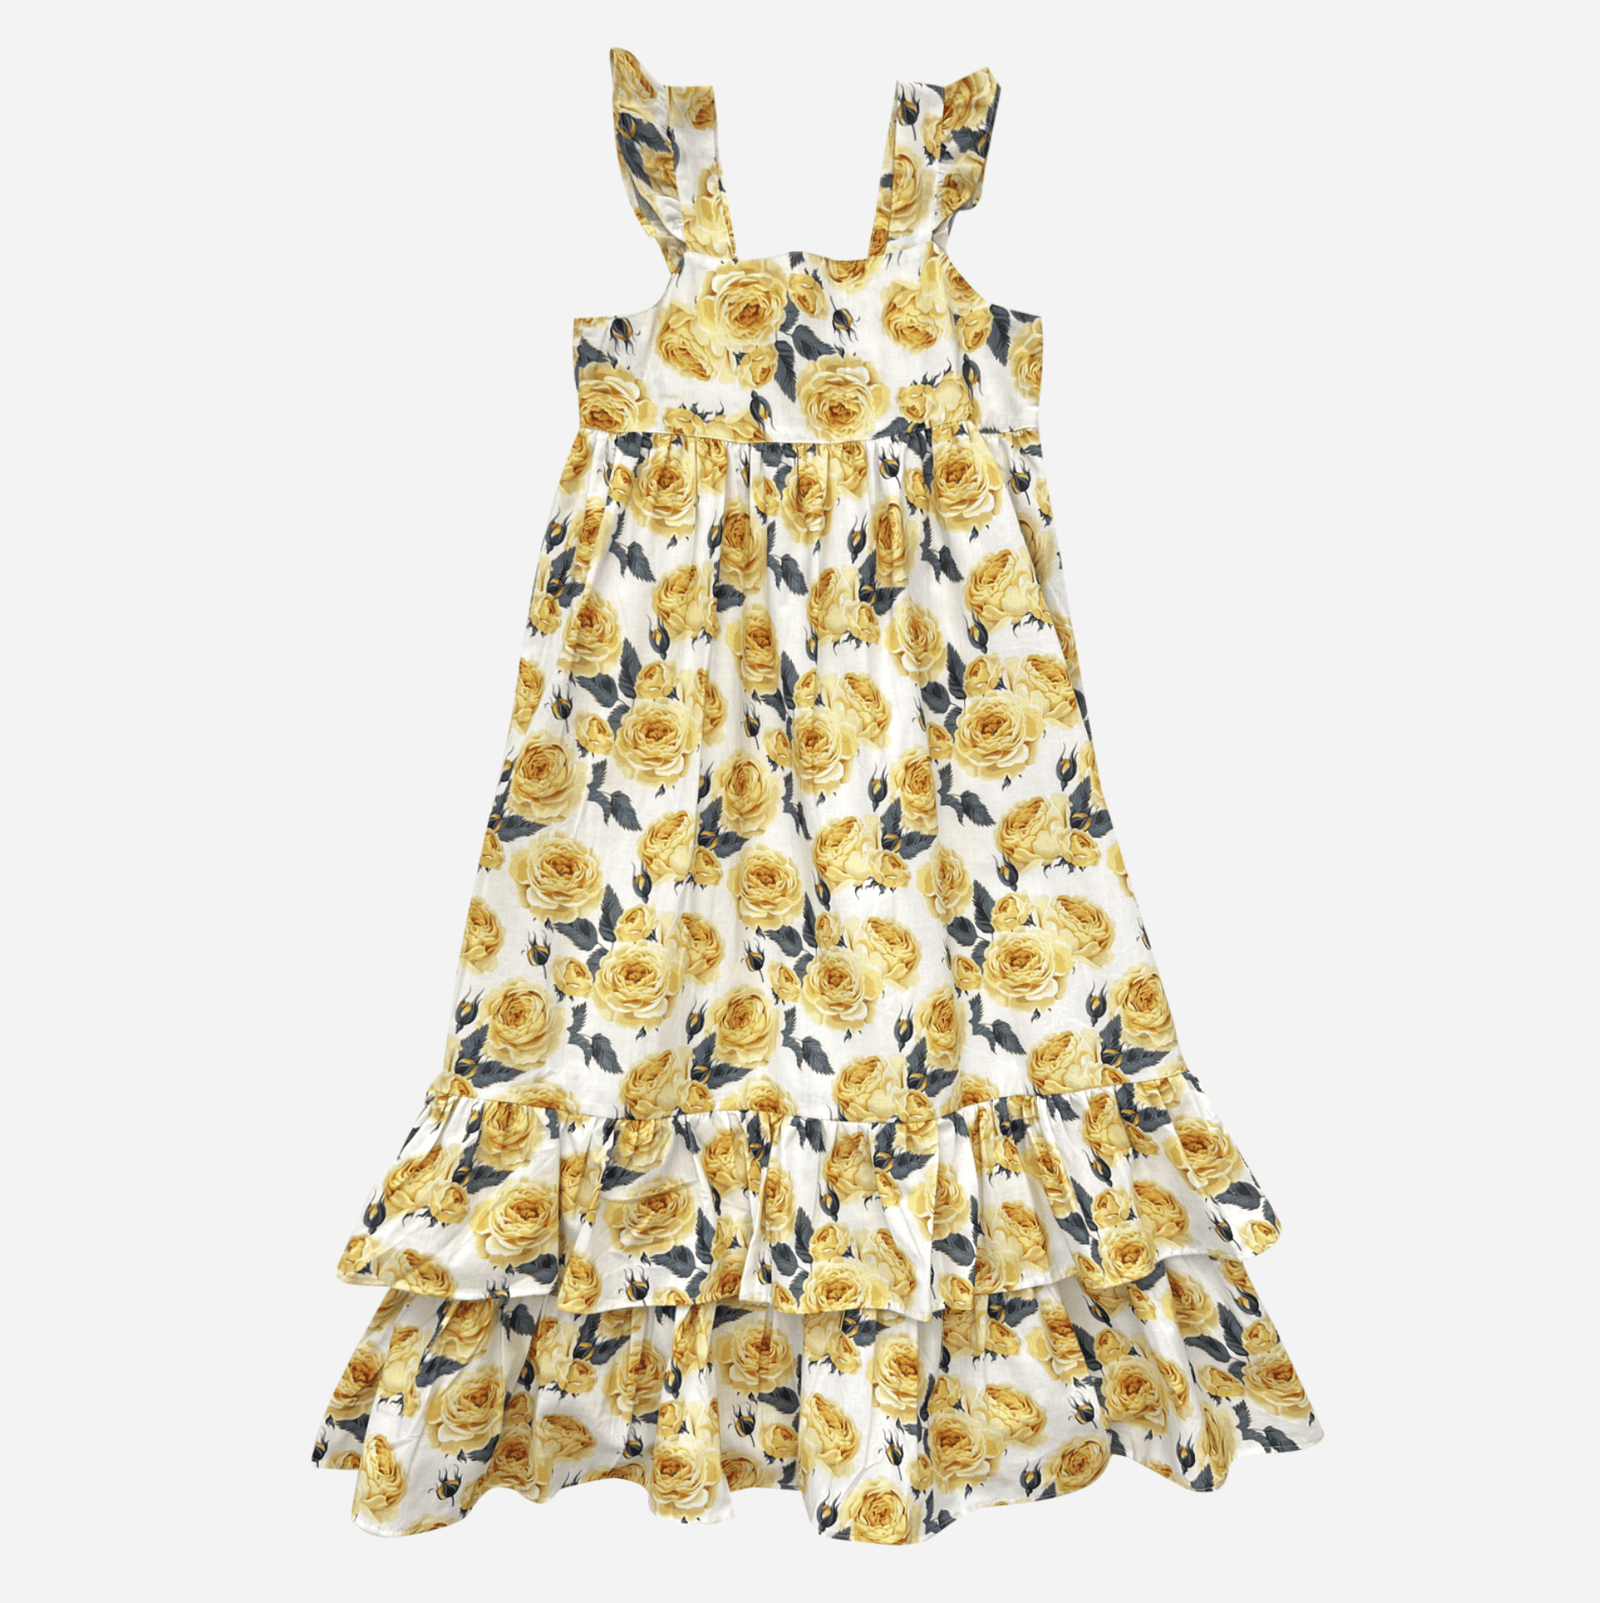 Emory Floral Hi-Lo Maxi Dress – Girls Will Be Girls